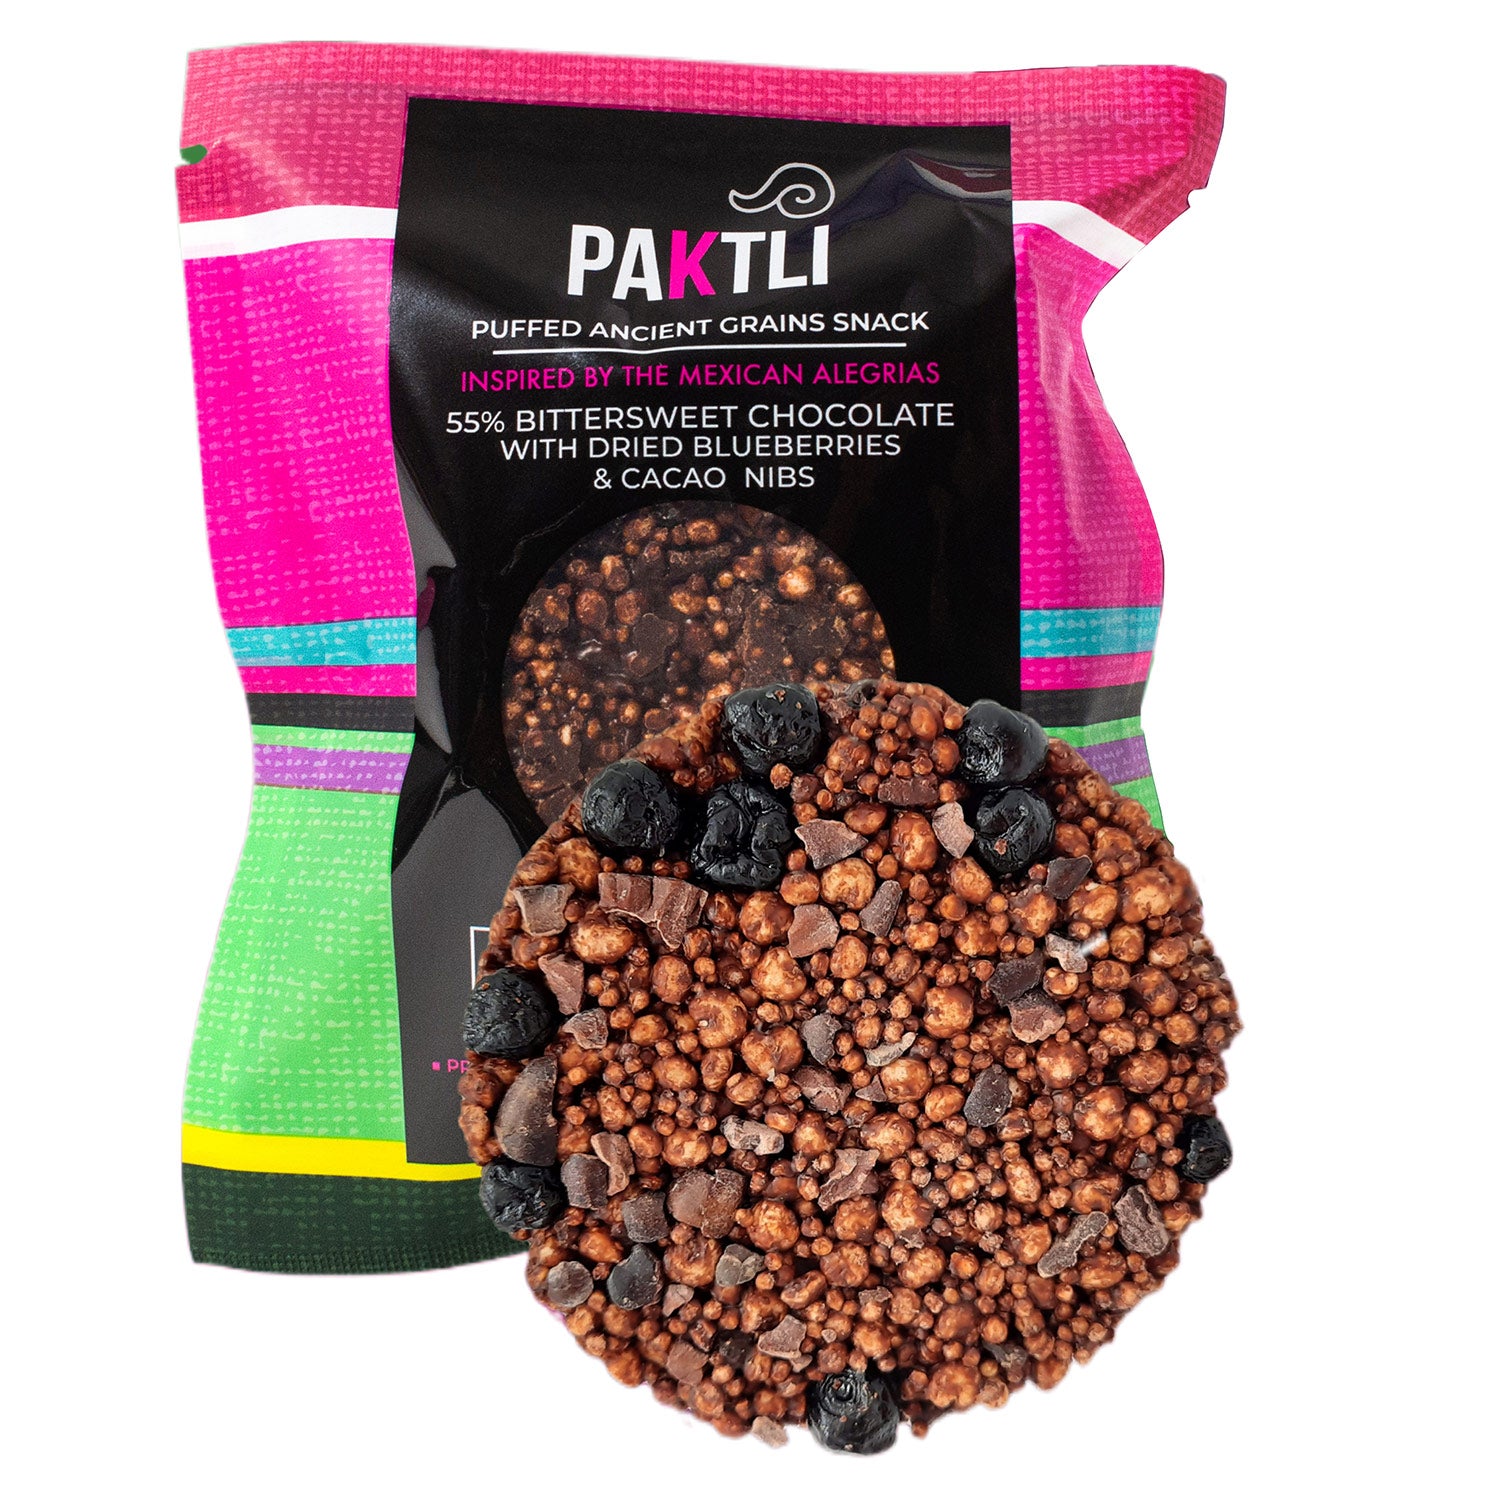 PAKTLI Bittersweet Chocolate Ancient Grain Snack With Dried Blueberries & Cacao Nibs